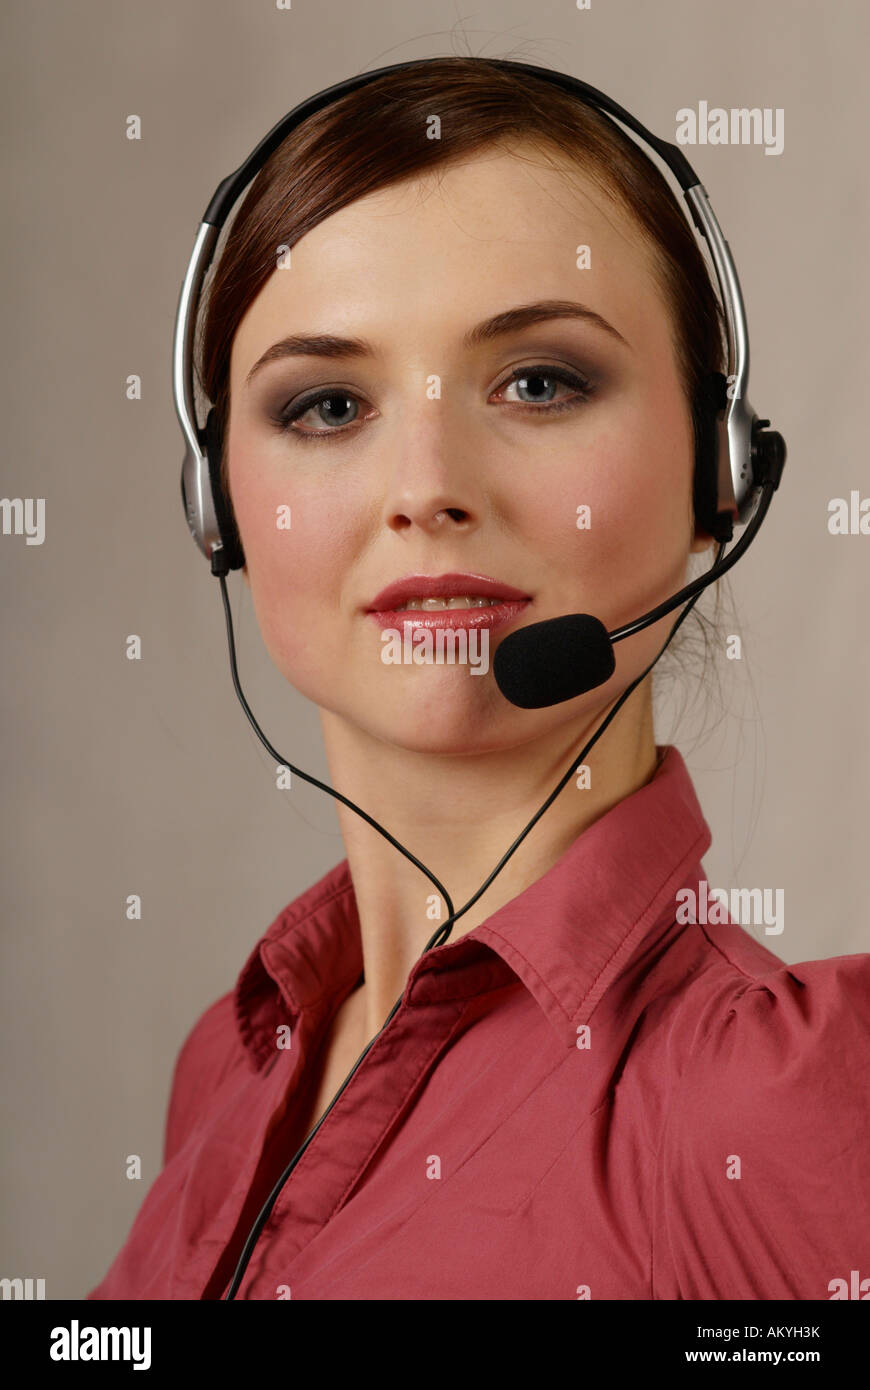 Young woman with headset, call center, telephone operator Stock Photo